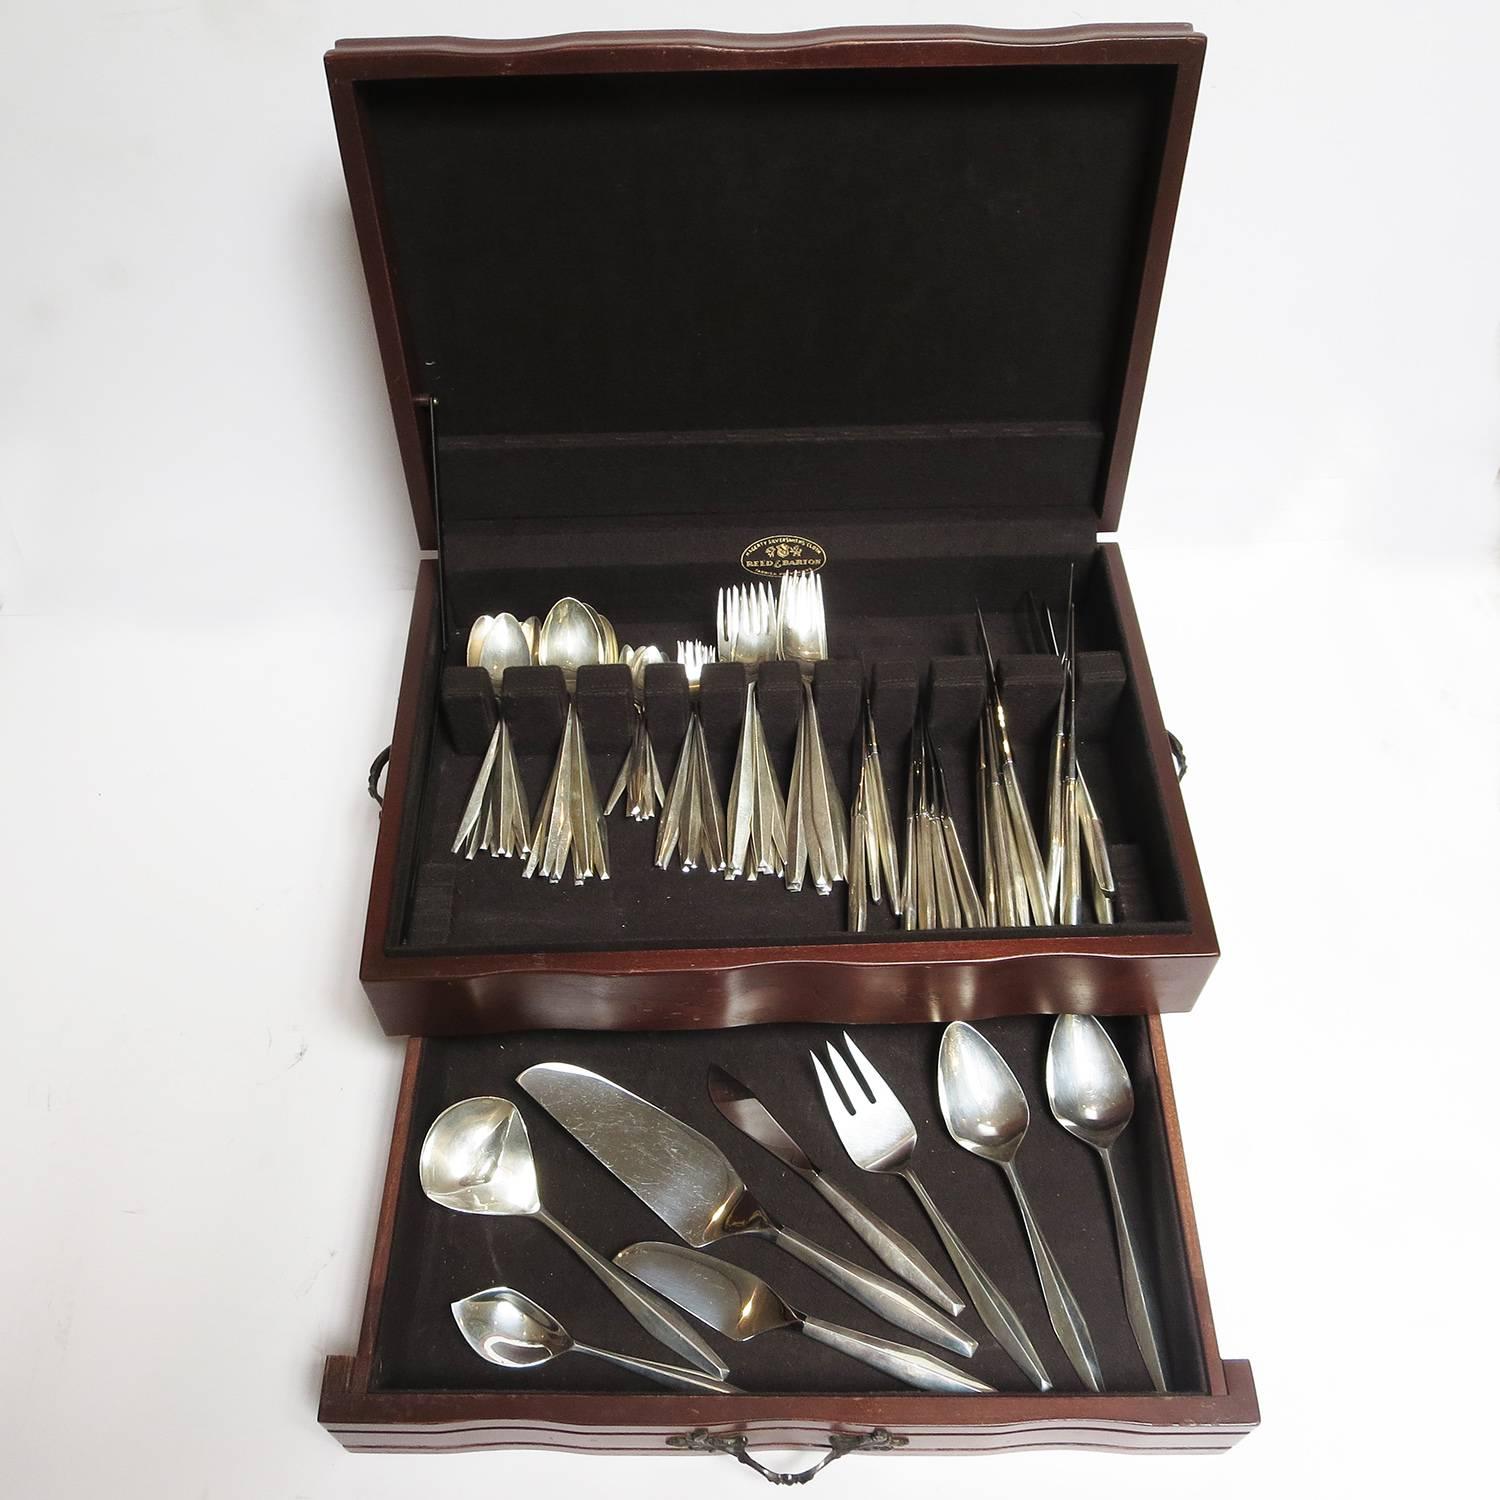 This beautifully executed sterling silver set was designed by renowned Italian master Gio Ponti. Dubbed the 